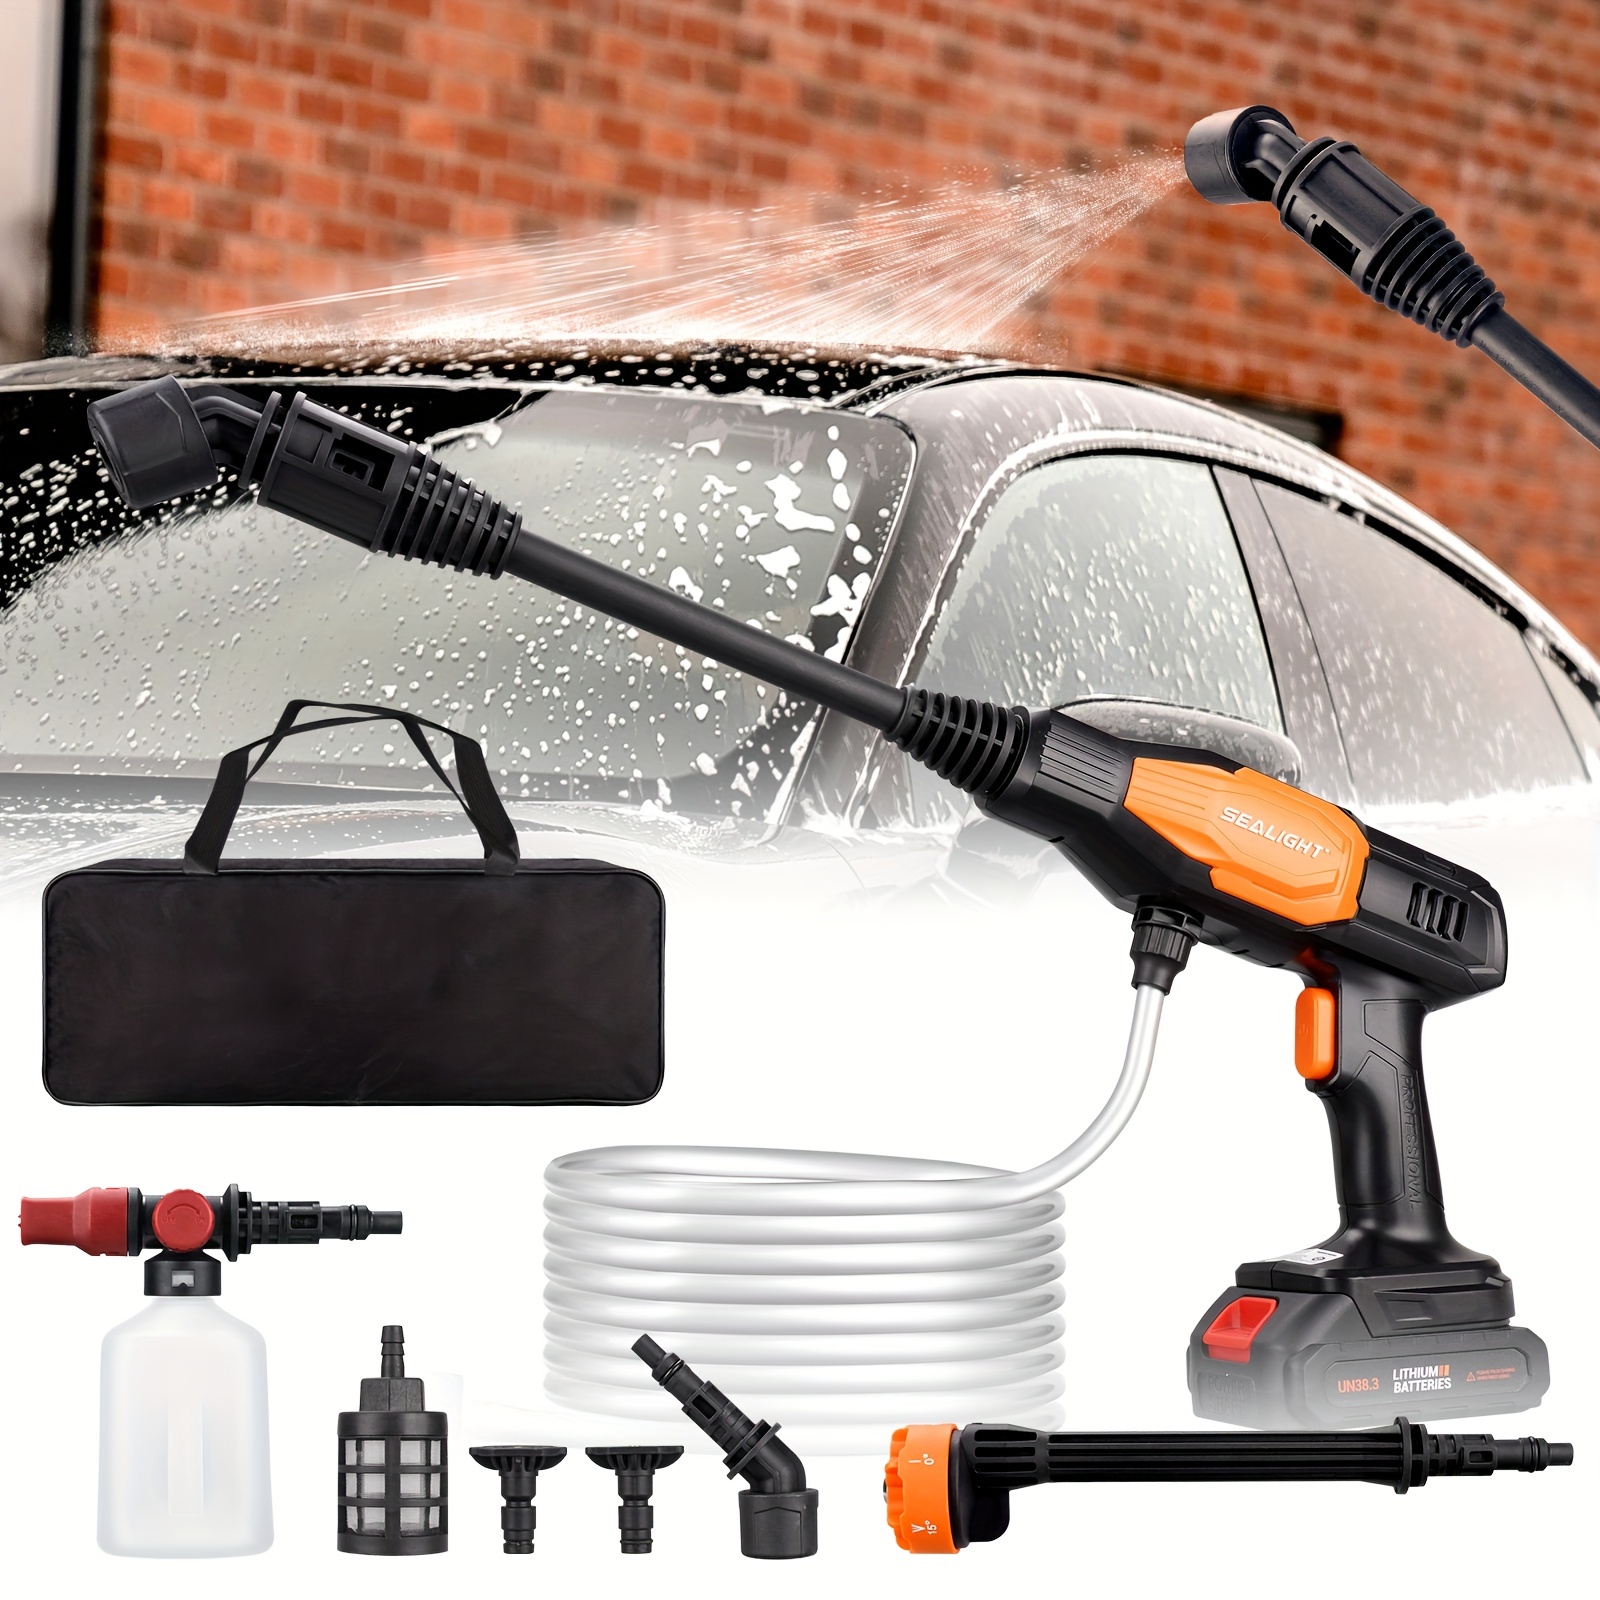 

Cordless Pressure Washer, 970psi Portable Power Washer With 2pcs Rechargeable 3.0ah Batteries/ 6-in-1 Nozzle/ 45-degree Nozzle, Handheld Cleaner For Car/ Bike/ Fence/ Garden/ Floor/ Yard